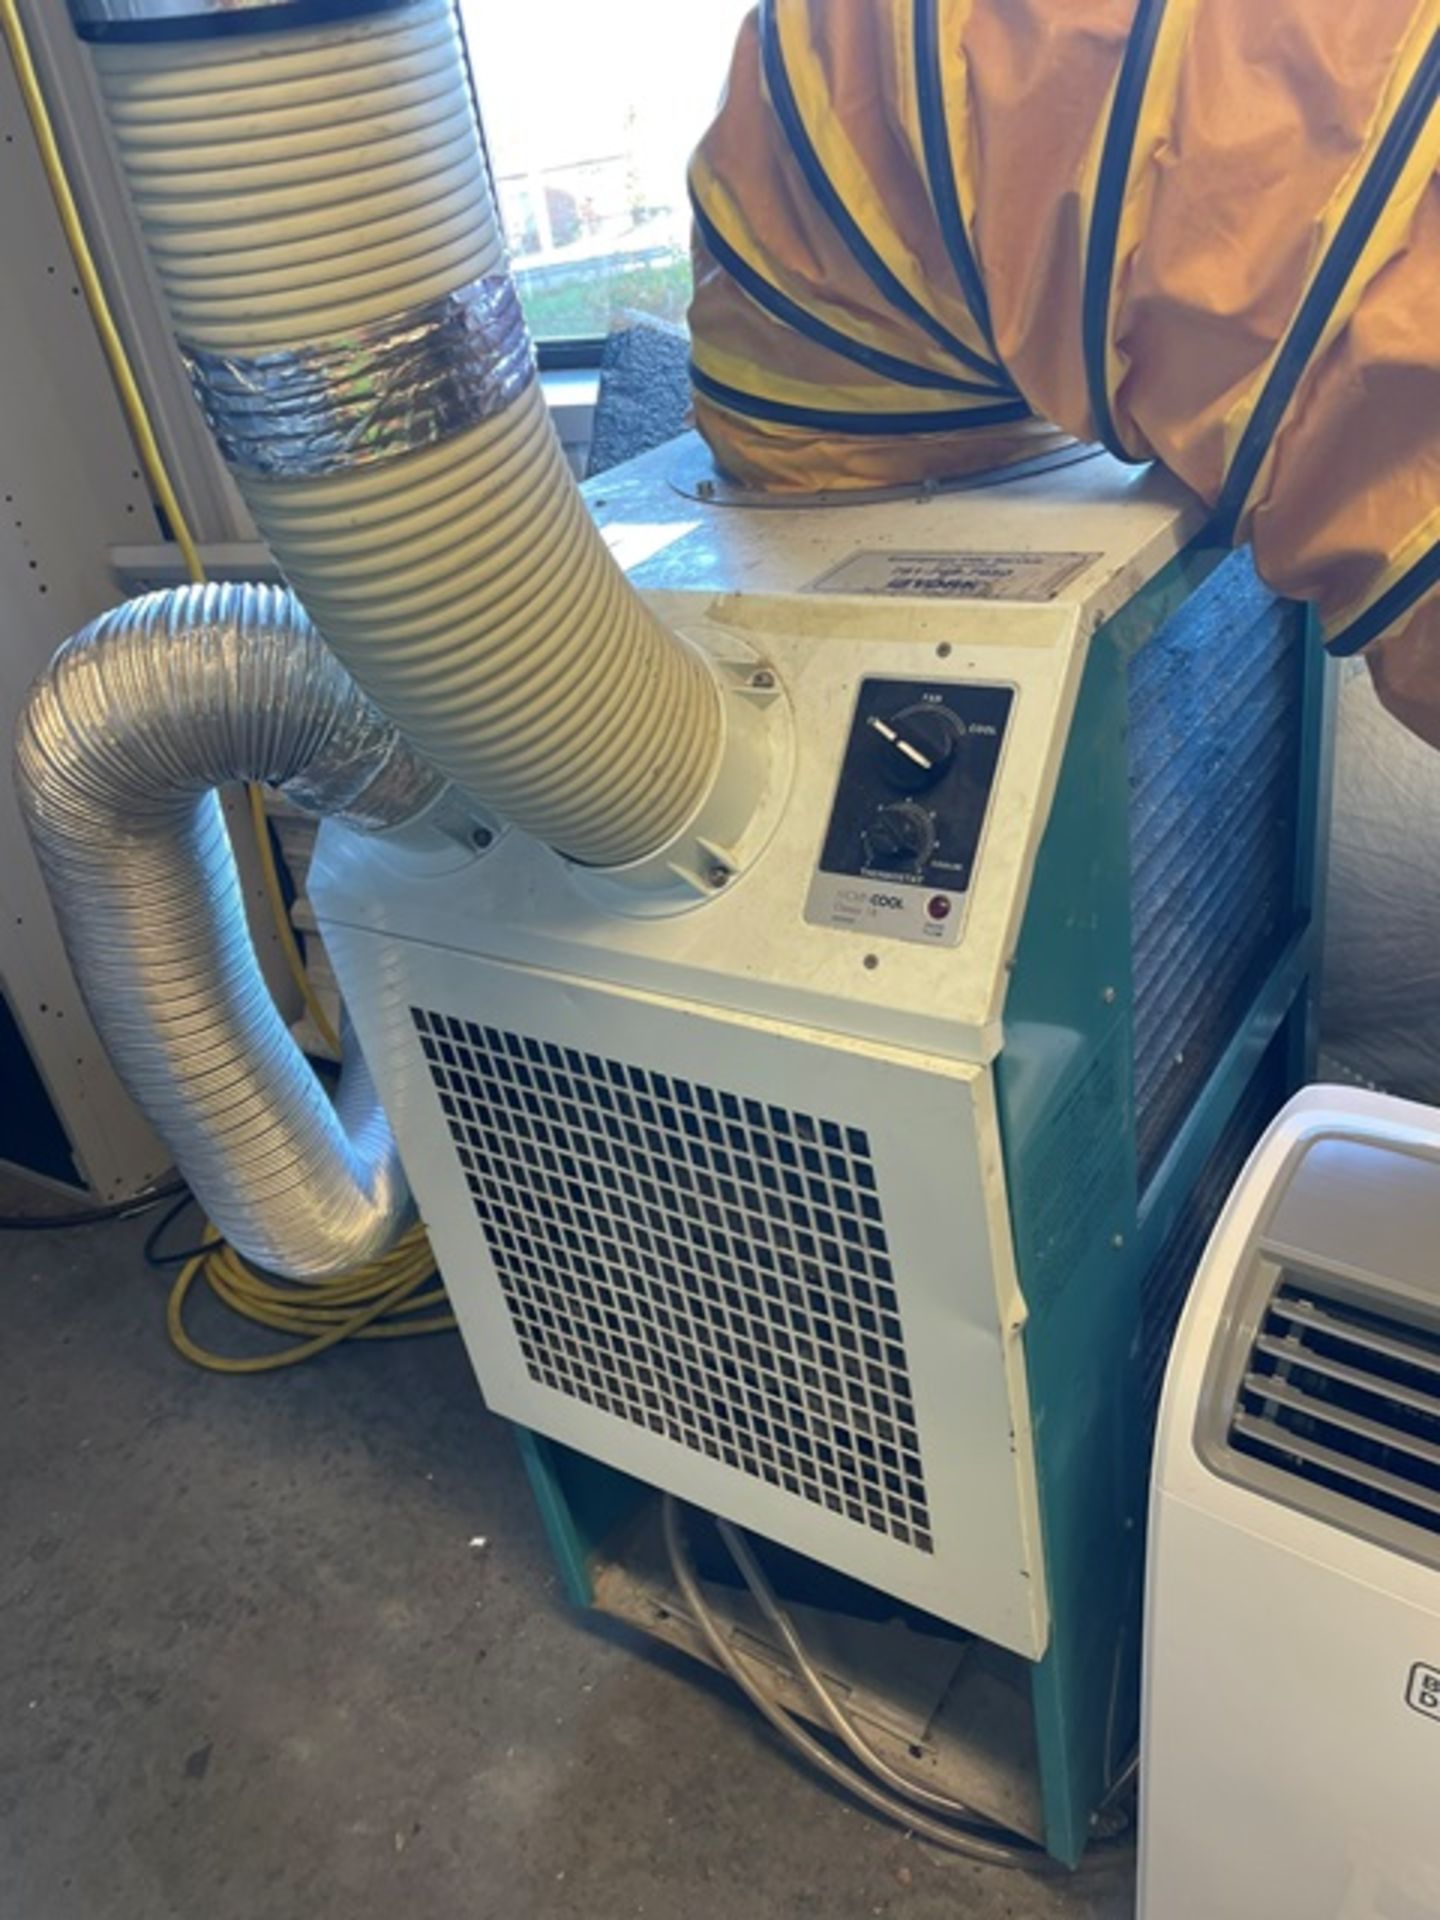 Movincool Office Classic 18 Air Unit, Rigging & Loading Fee: $300 - Image 2 of 3